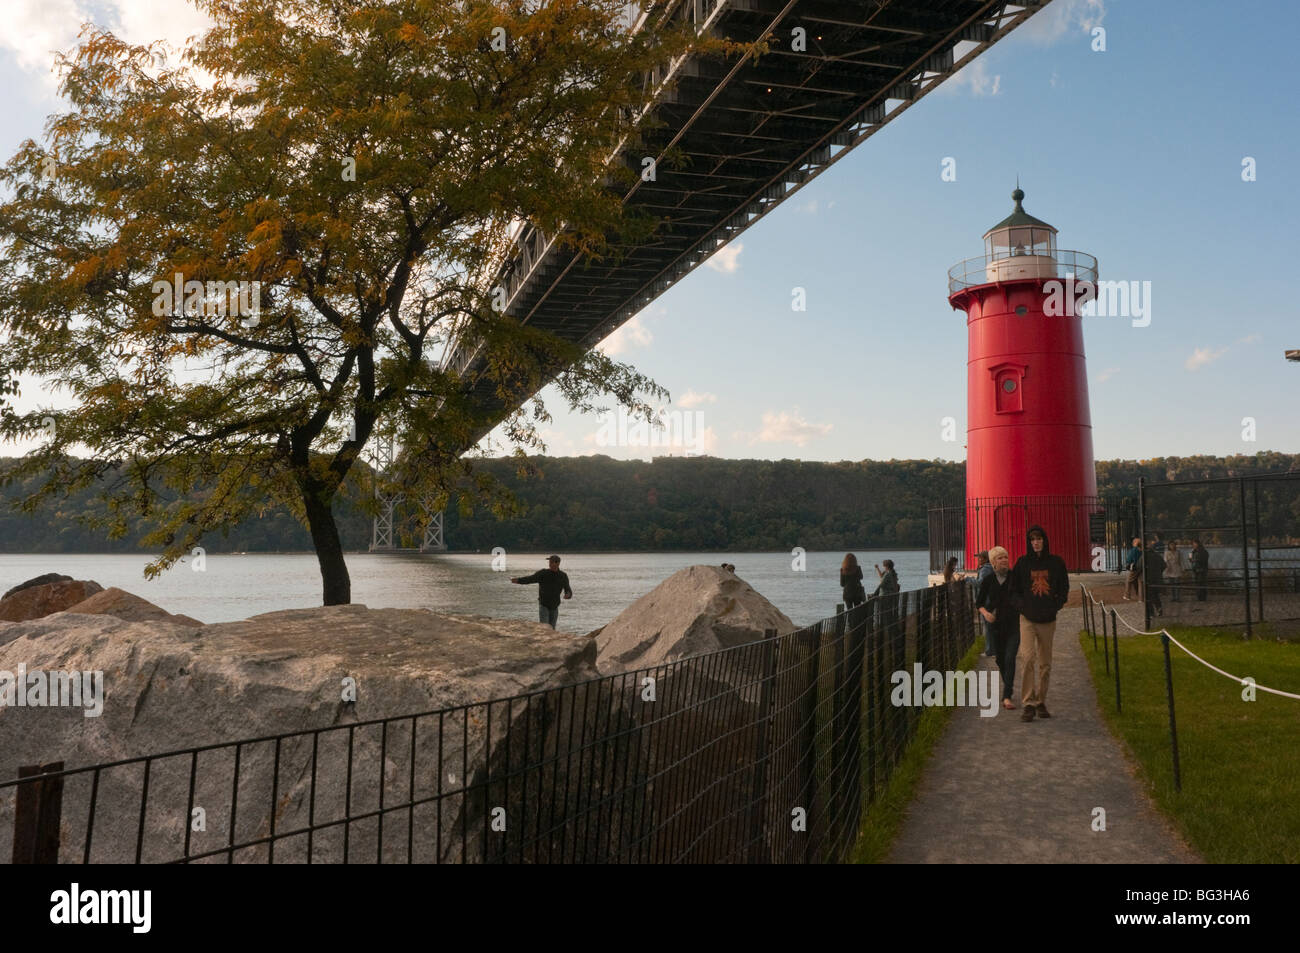 New York, NY - 11 October 2009 The Little Red Lighthouse in Fort Washington Park ©Stacy Walsh Rosenstock/Alamy Stock Photo